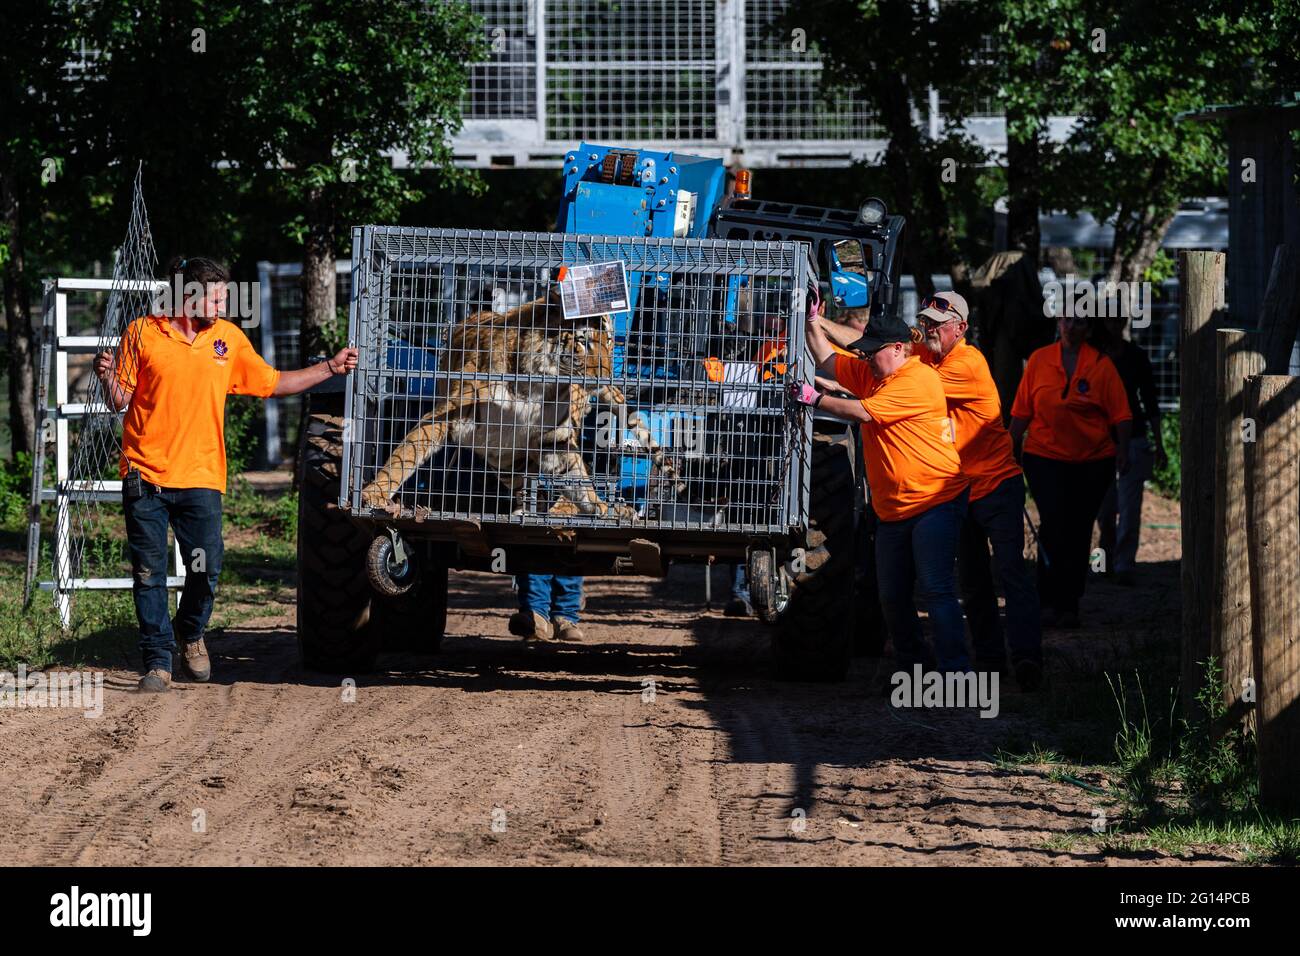 U.S. Marshals seize 68 protected lions, tigers, lion-tiger hybrids, and a jaguar from Jeffrey and Lauren Lowe Tiger King Park May 17, 2021 in Thackerville, Oklahoma. The park, formerly owned by the Tiger King, Joe Exotic, was seized for violating  the Endangered Species Act. Stock Photo